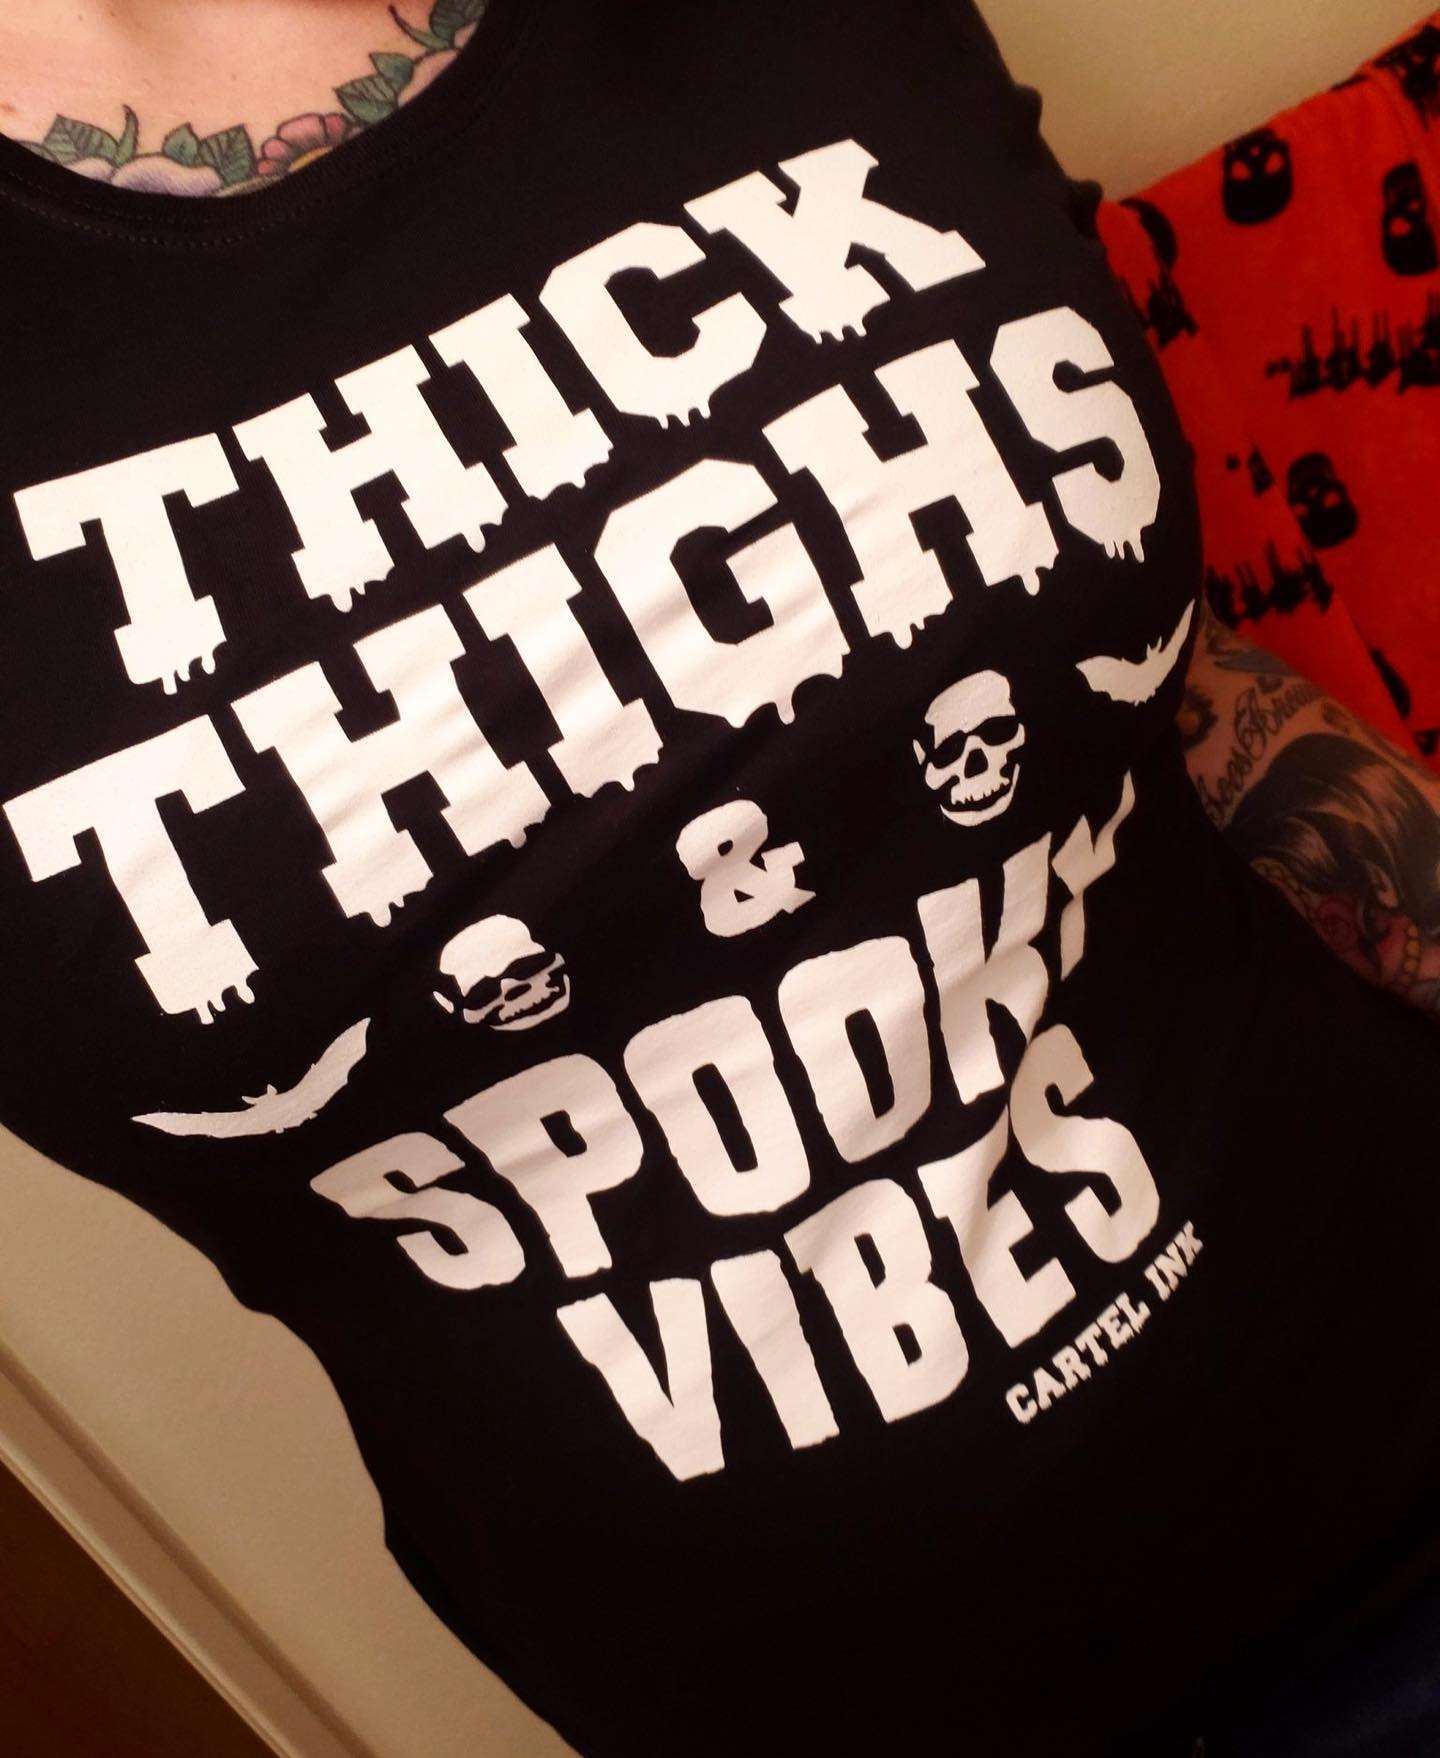 Thick thighs spooky vibes - Cartel Ink, Halloween shirt, evil skull